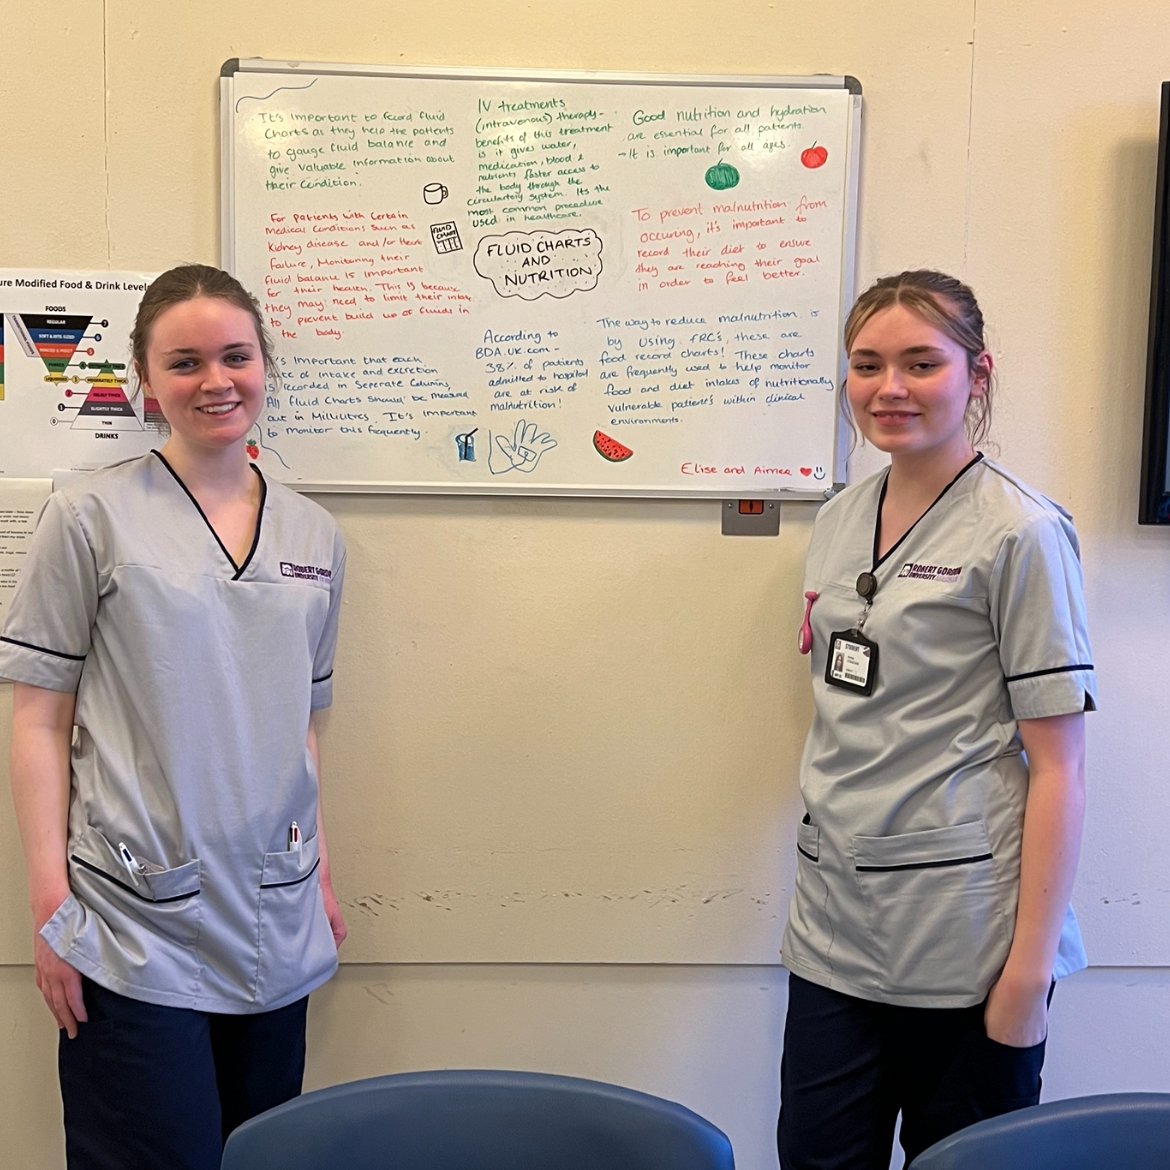 📸: Elise and Aimee (first year RGU students on their first placement) created this fab information board on the importance of food, fluid, and nutrition in ward 9 & 10 at Woodend Hospital. @SOARS_WGH @NHWeek #NHWeek #TeamWoodend